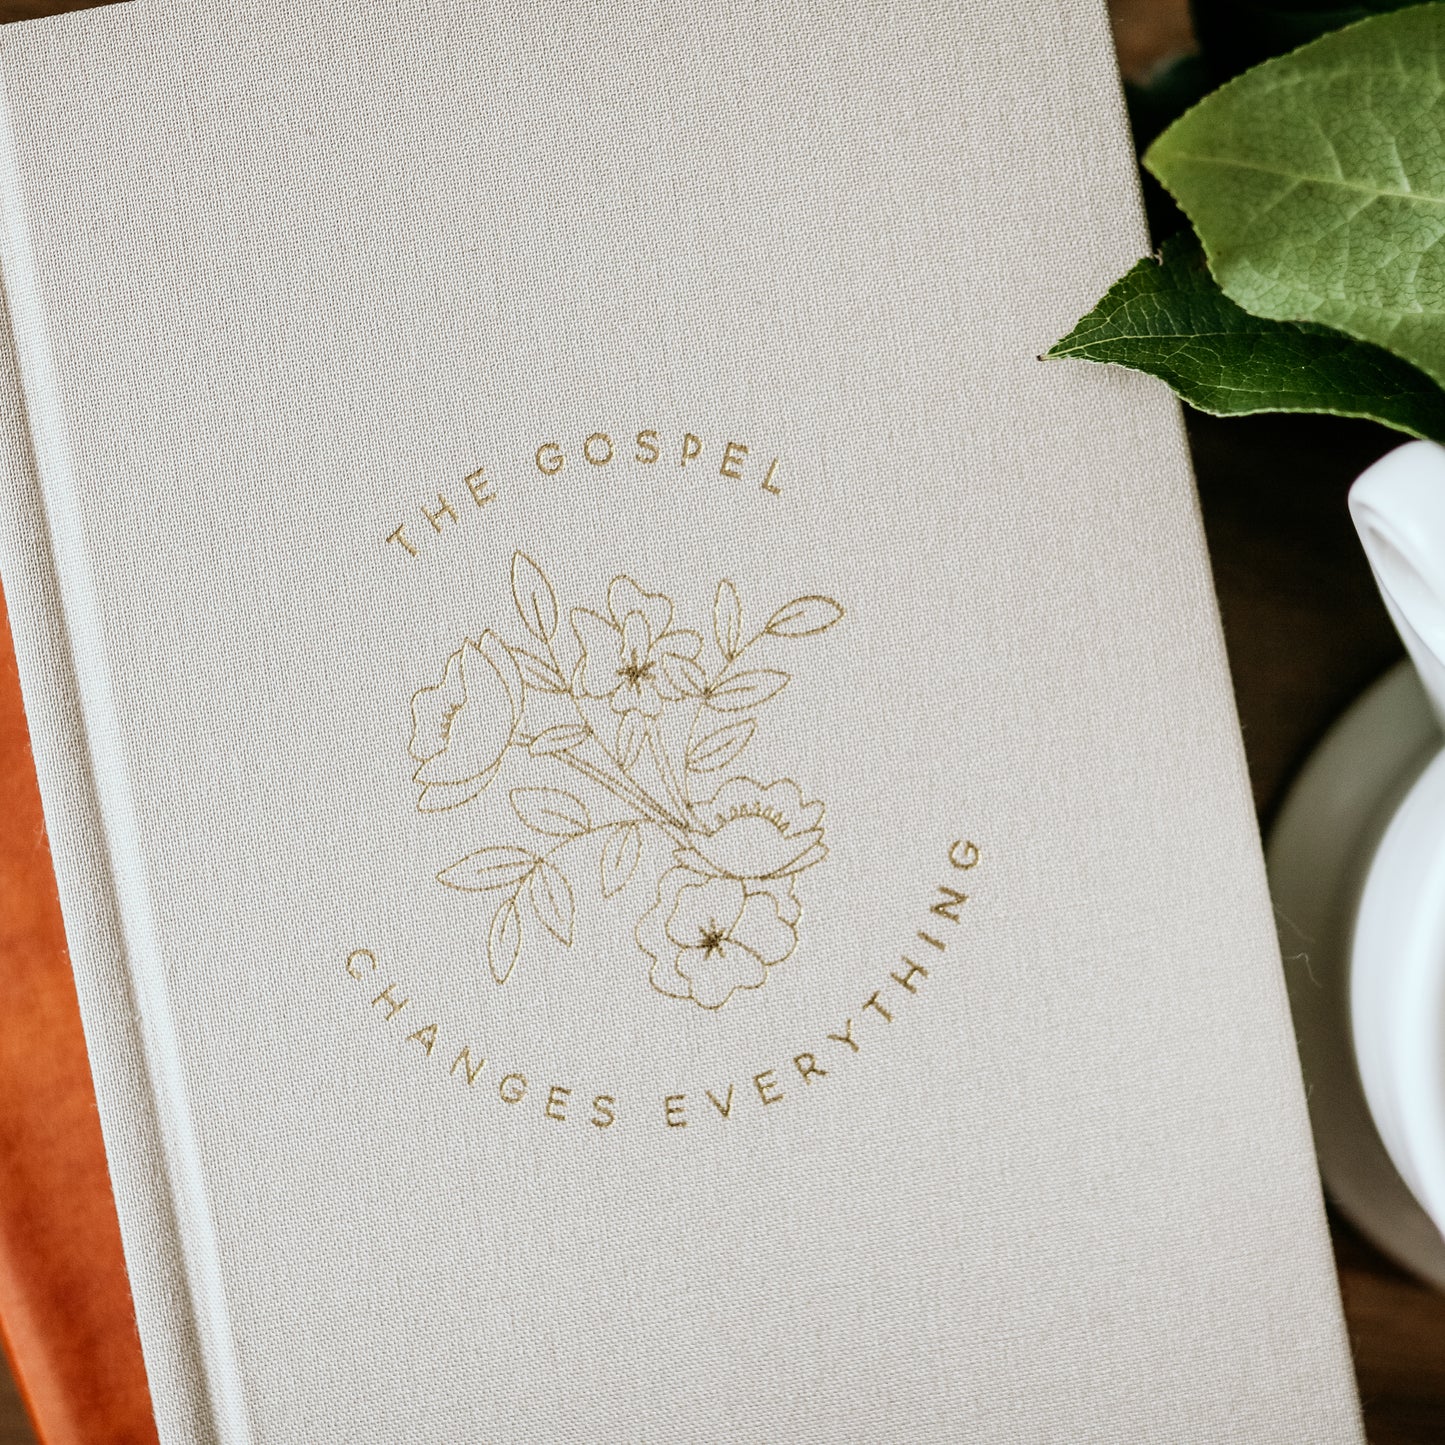 The Gospel Changes Everything Journal